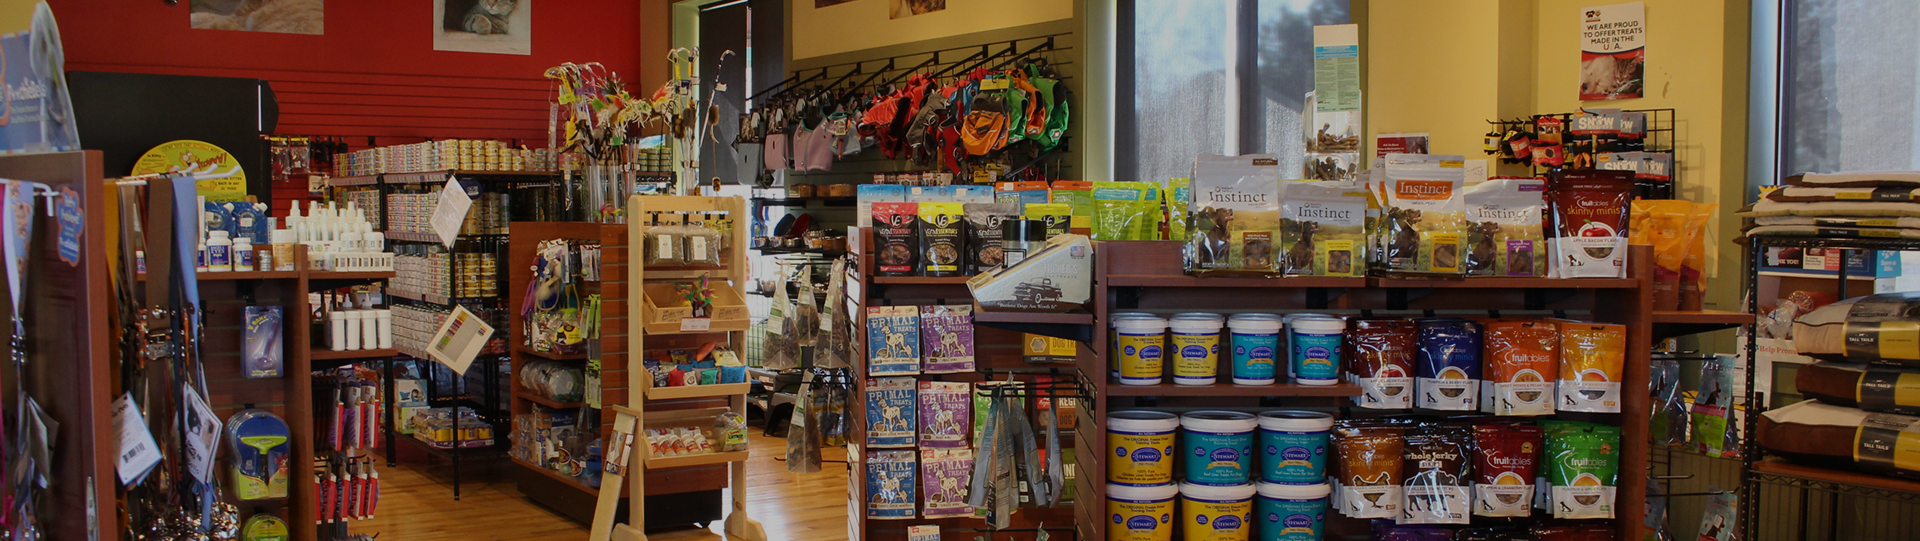 Pet products, dog food, cat food, and expertise for your pet's needs.